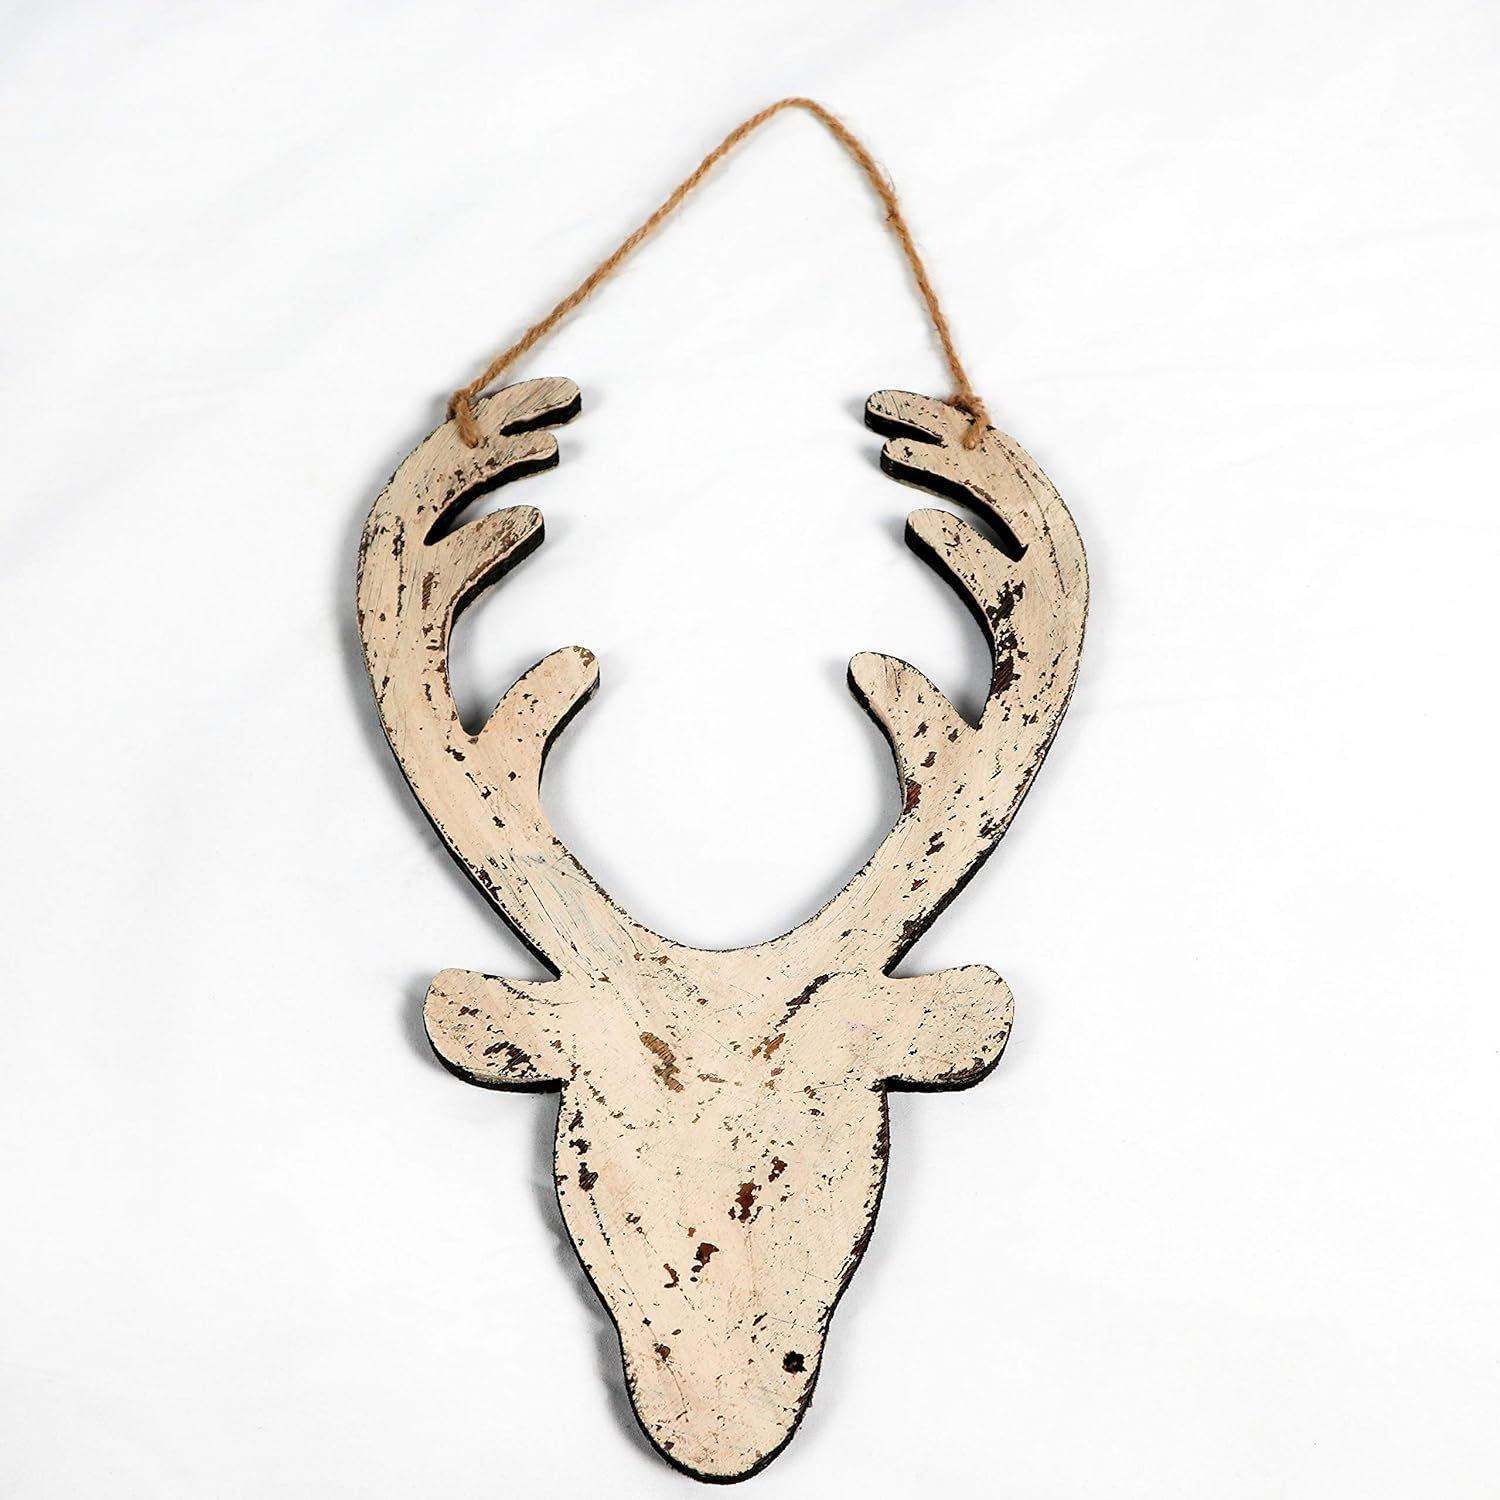 Cream Christmas Wooden Hanging Deer Head Wall Decoration Xmas Home Office Holiday Decorative Centrepiece 26cm - image 1